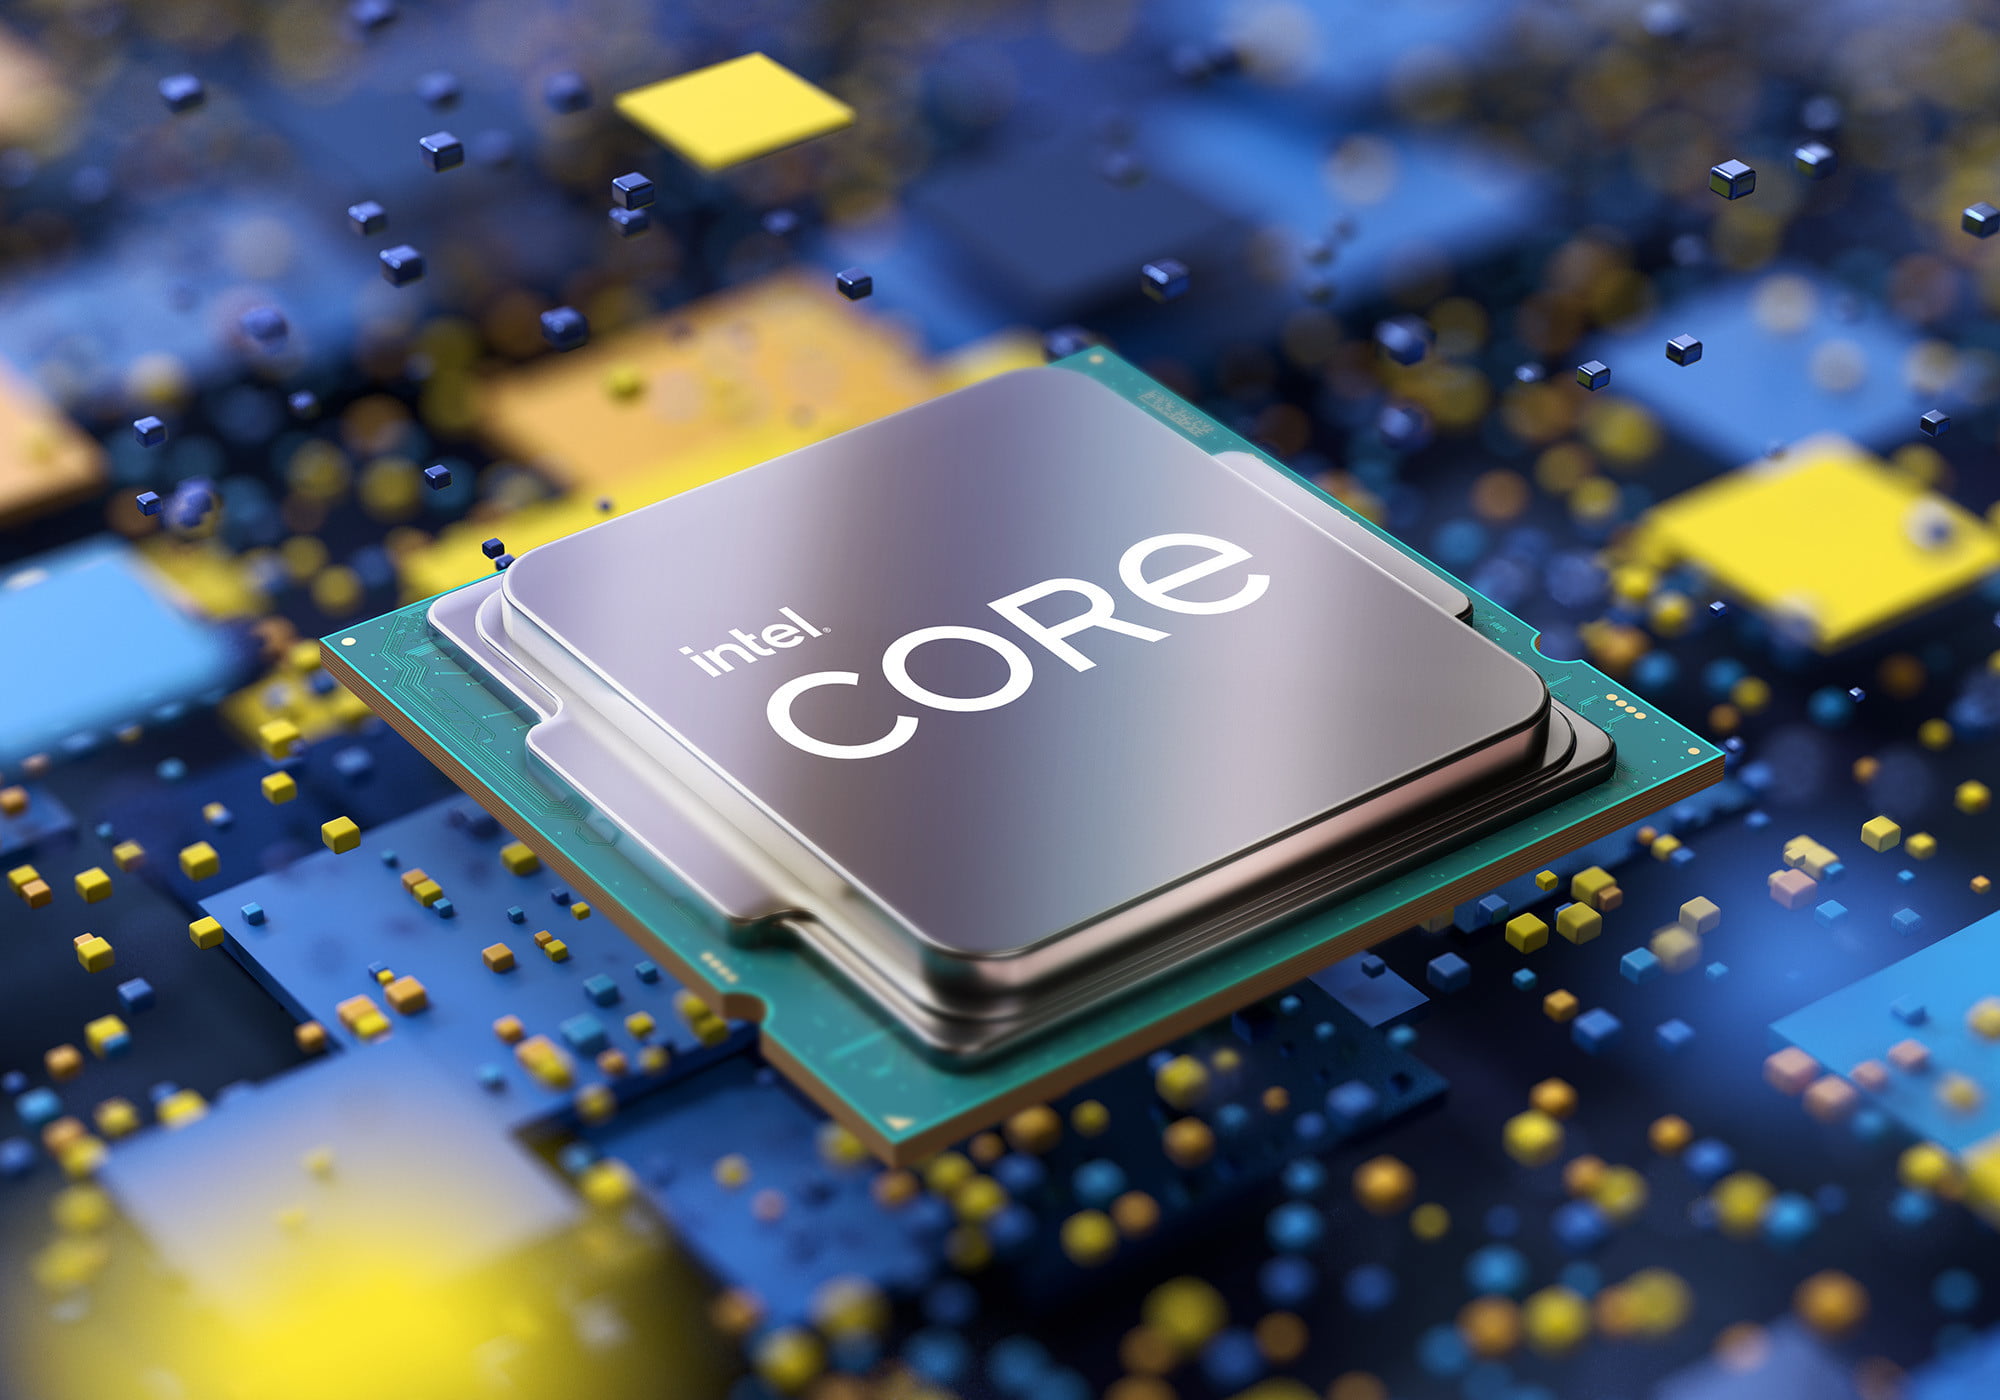 Intel’s 12th generation Alder Lake chips may have a new release date